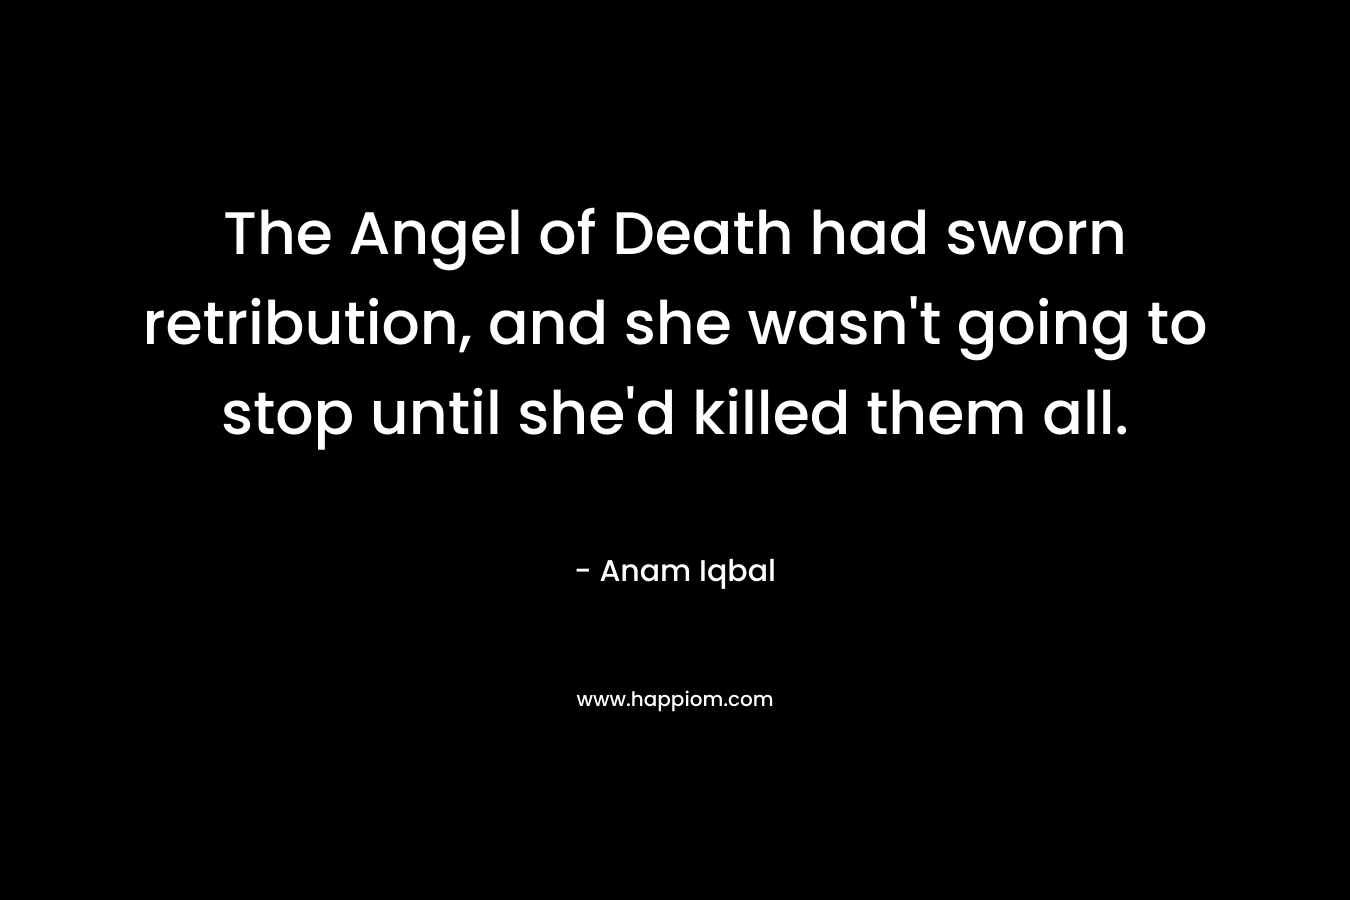 The Angel of Death had sworn retribution, and she wasn’t going to stop until she’d killed them all. – Anam Iqbal